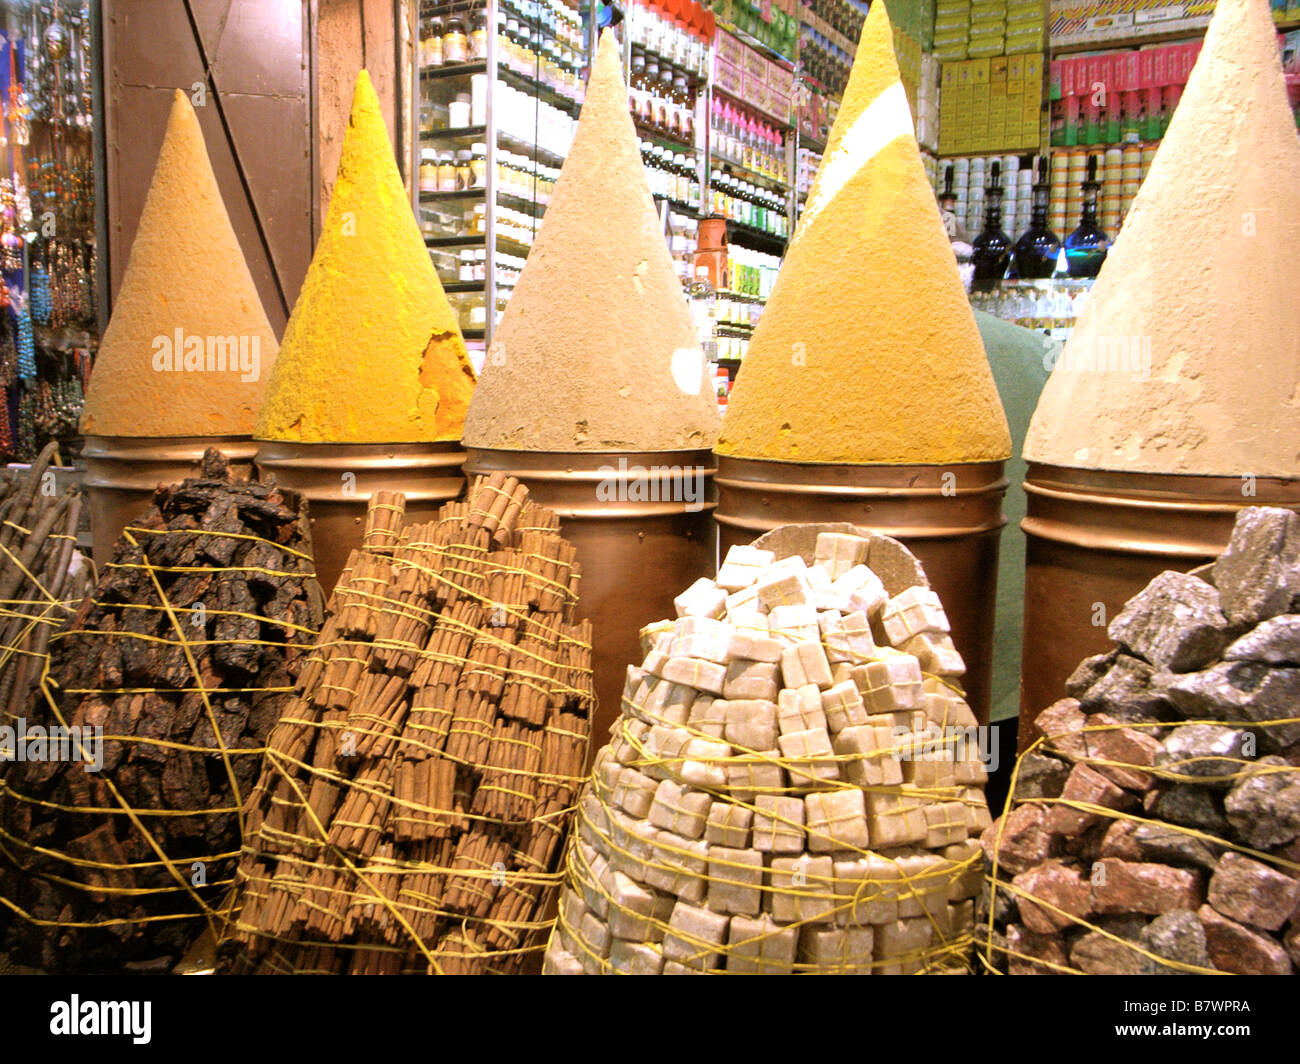 Spices and remedies in a souk in Marrakech, Morocco Stock Photo